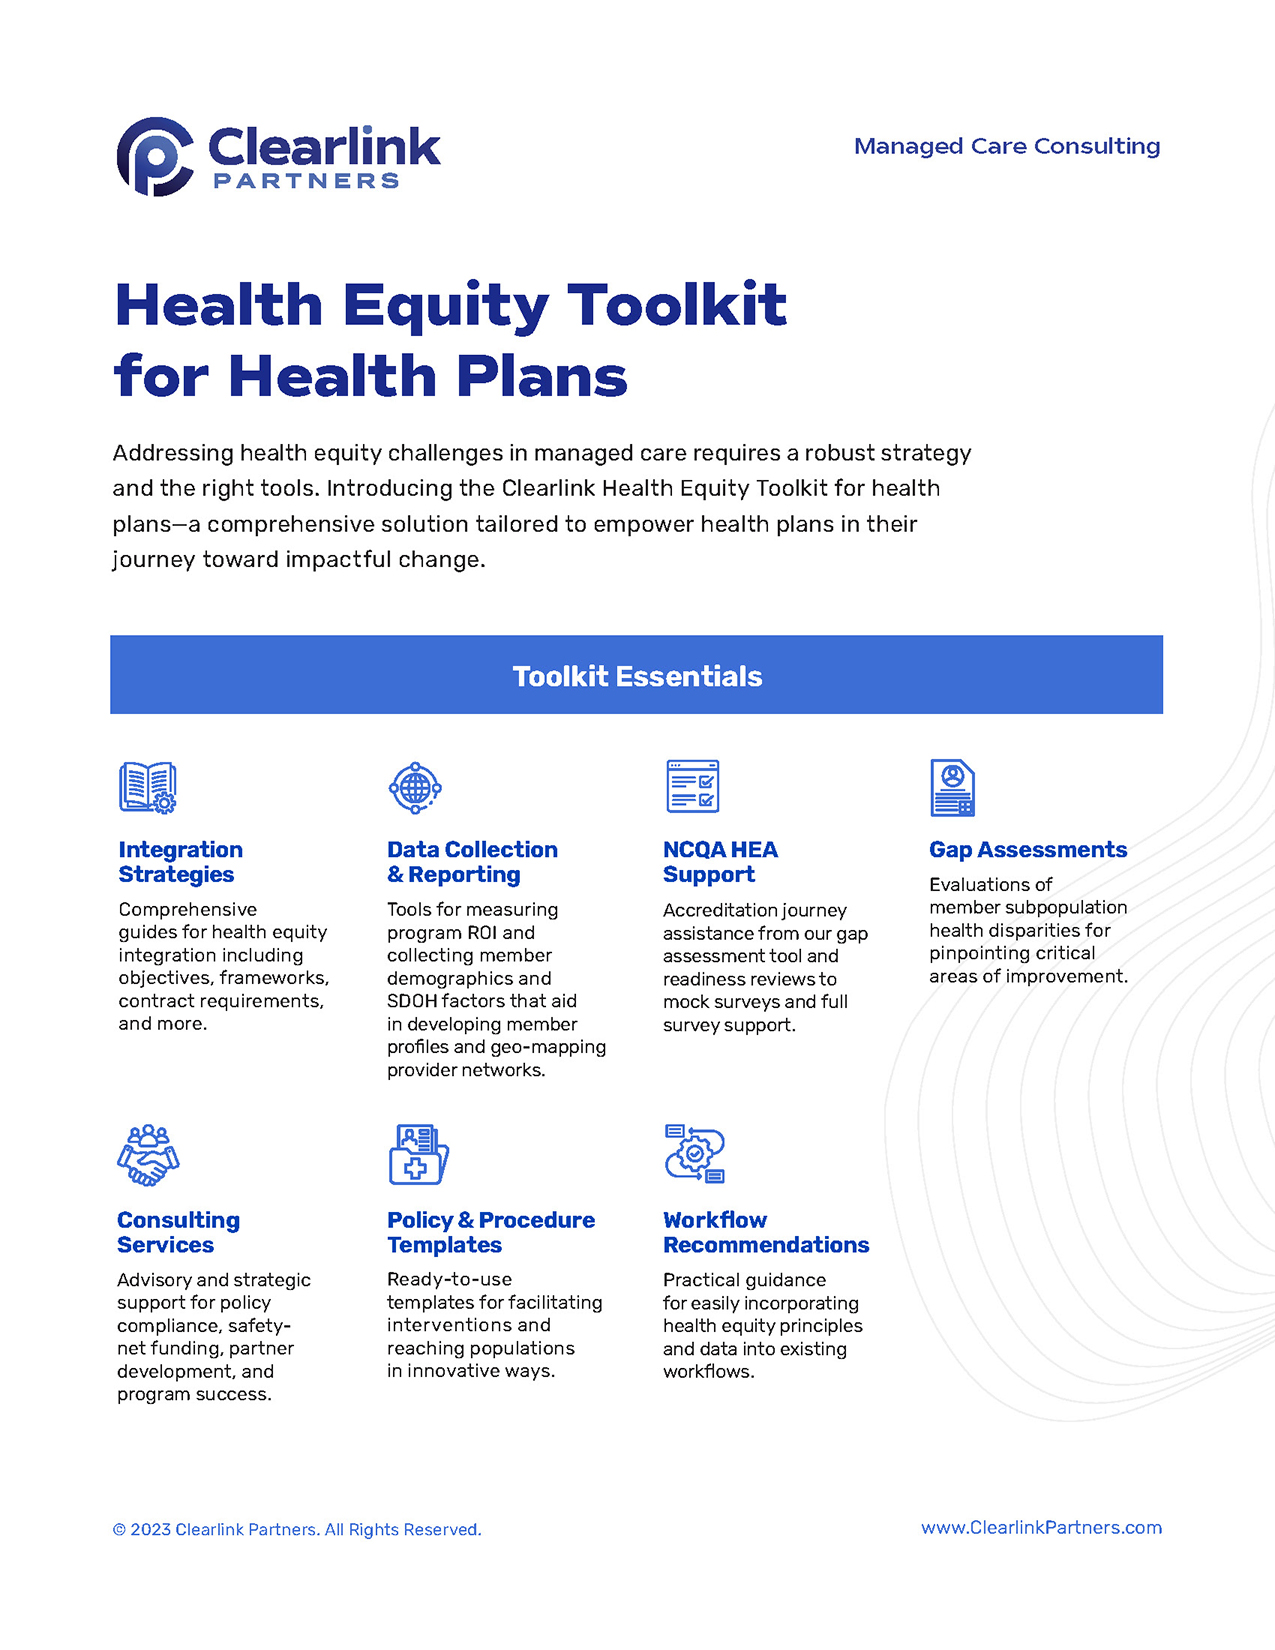 Health Equity Toolkit for Health Plans